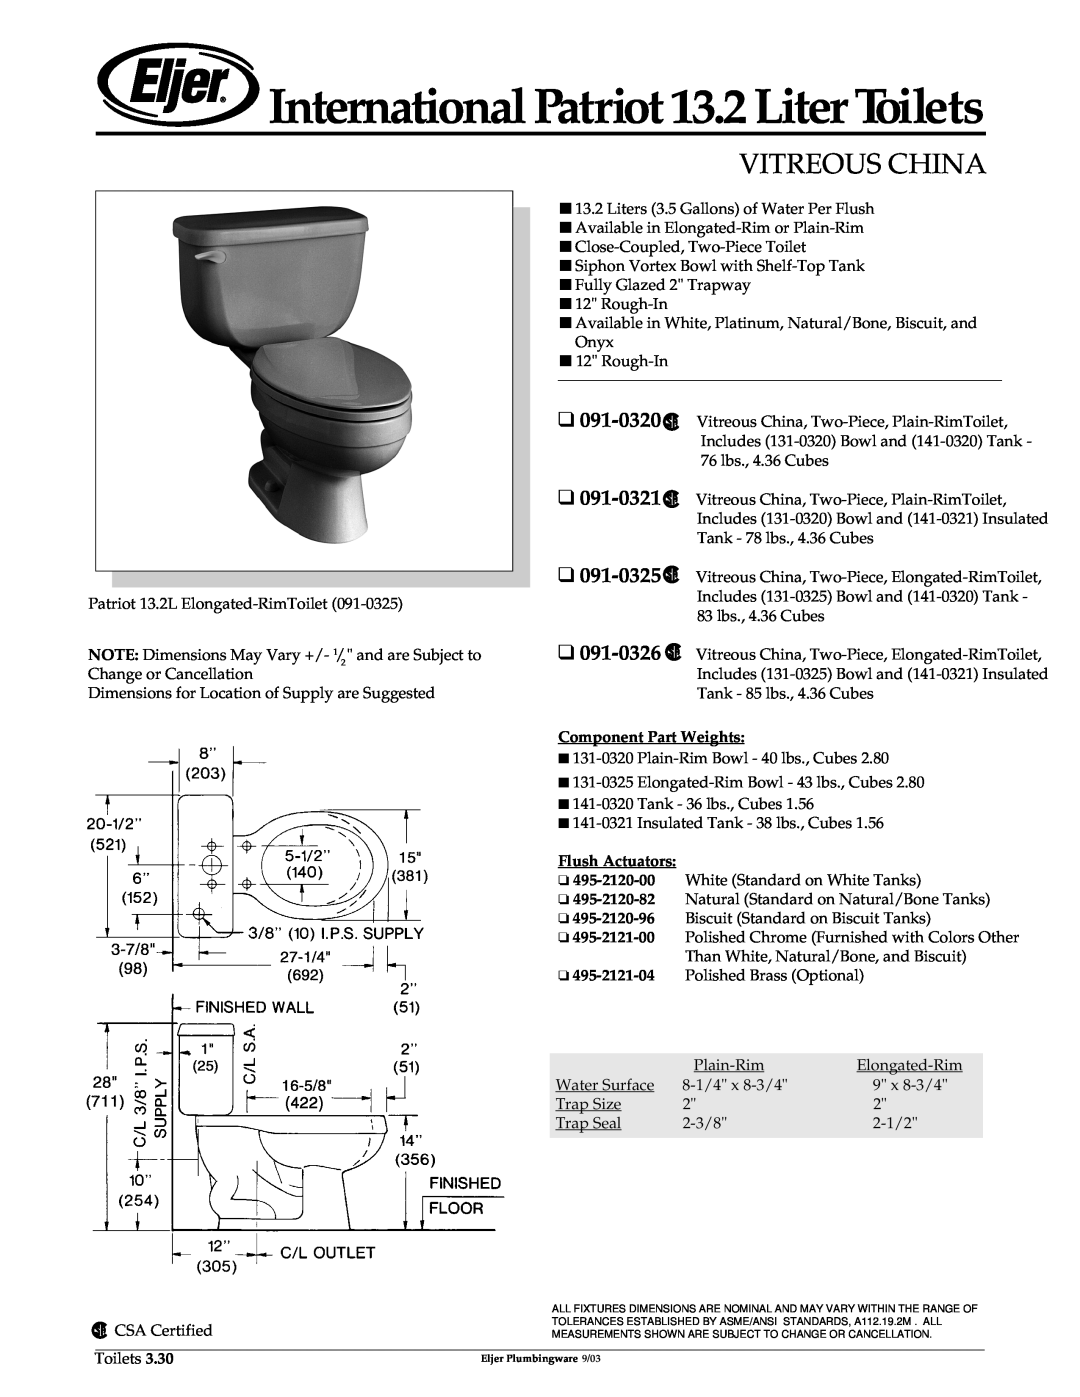 American Standard 091-0320 dimensions International Patriot 13.2 Liter Toilets, Vitreous China, Component Part Weights 